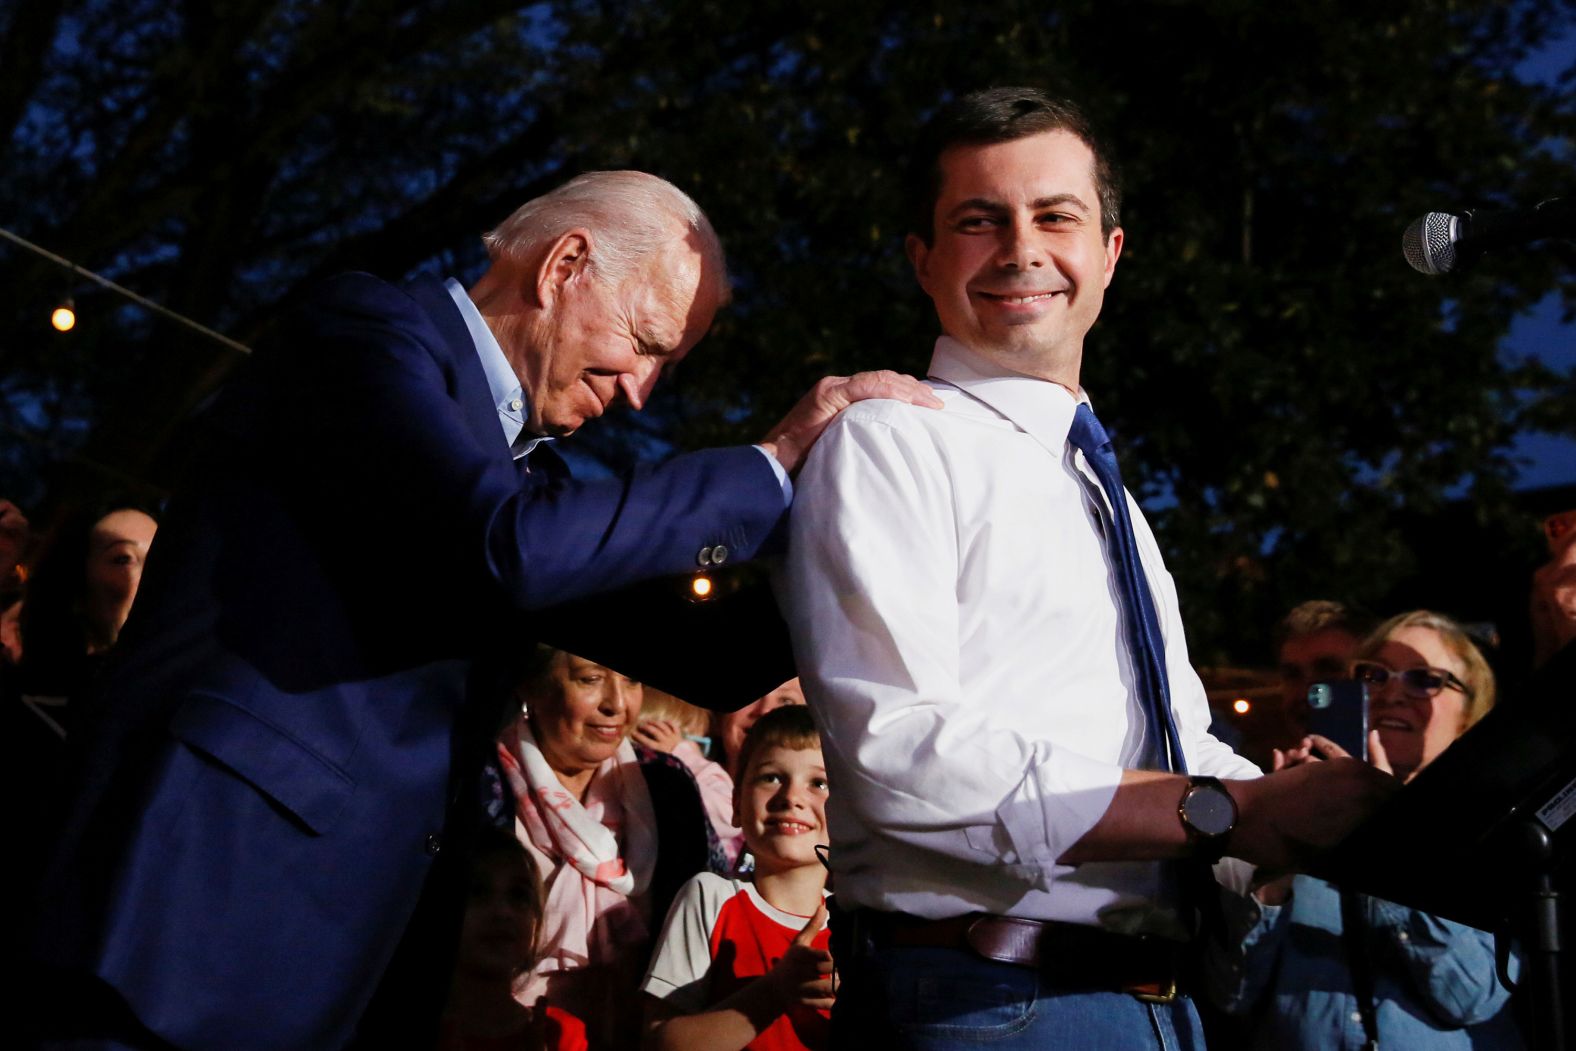 Biden puts his hands on the shoulders of former South Bend, Indiana, Mayor Pete Buttigieg, who dropped out of the race Sunday and endorsed Biden during this rally in Dallas on Monday.